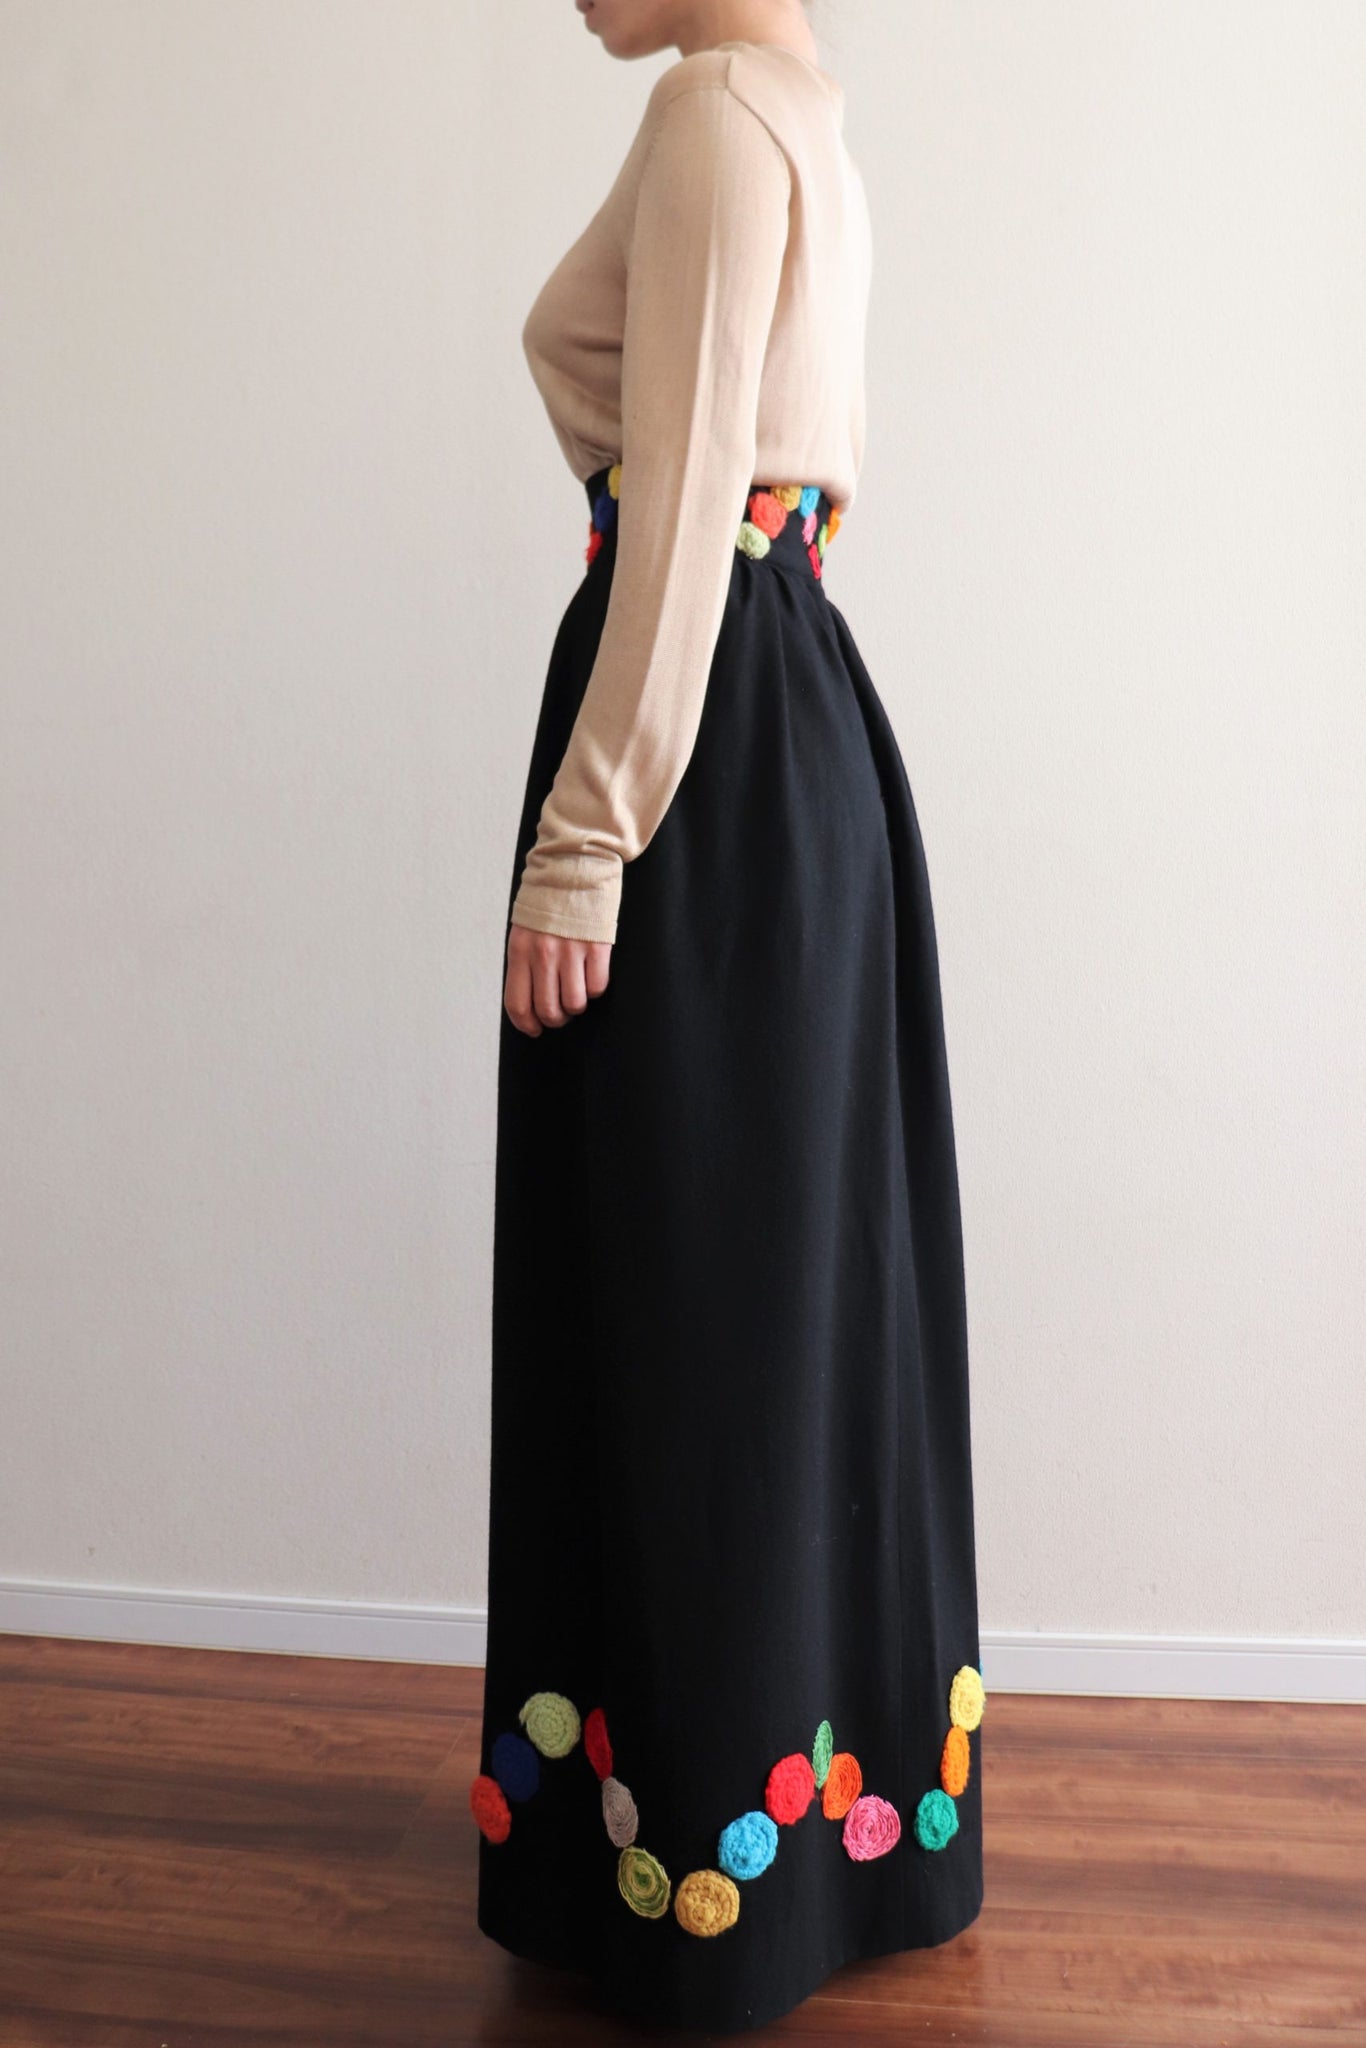 Multicolor Embroidered Wool Skirt